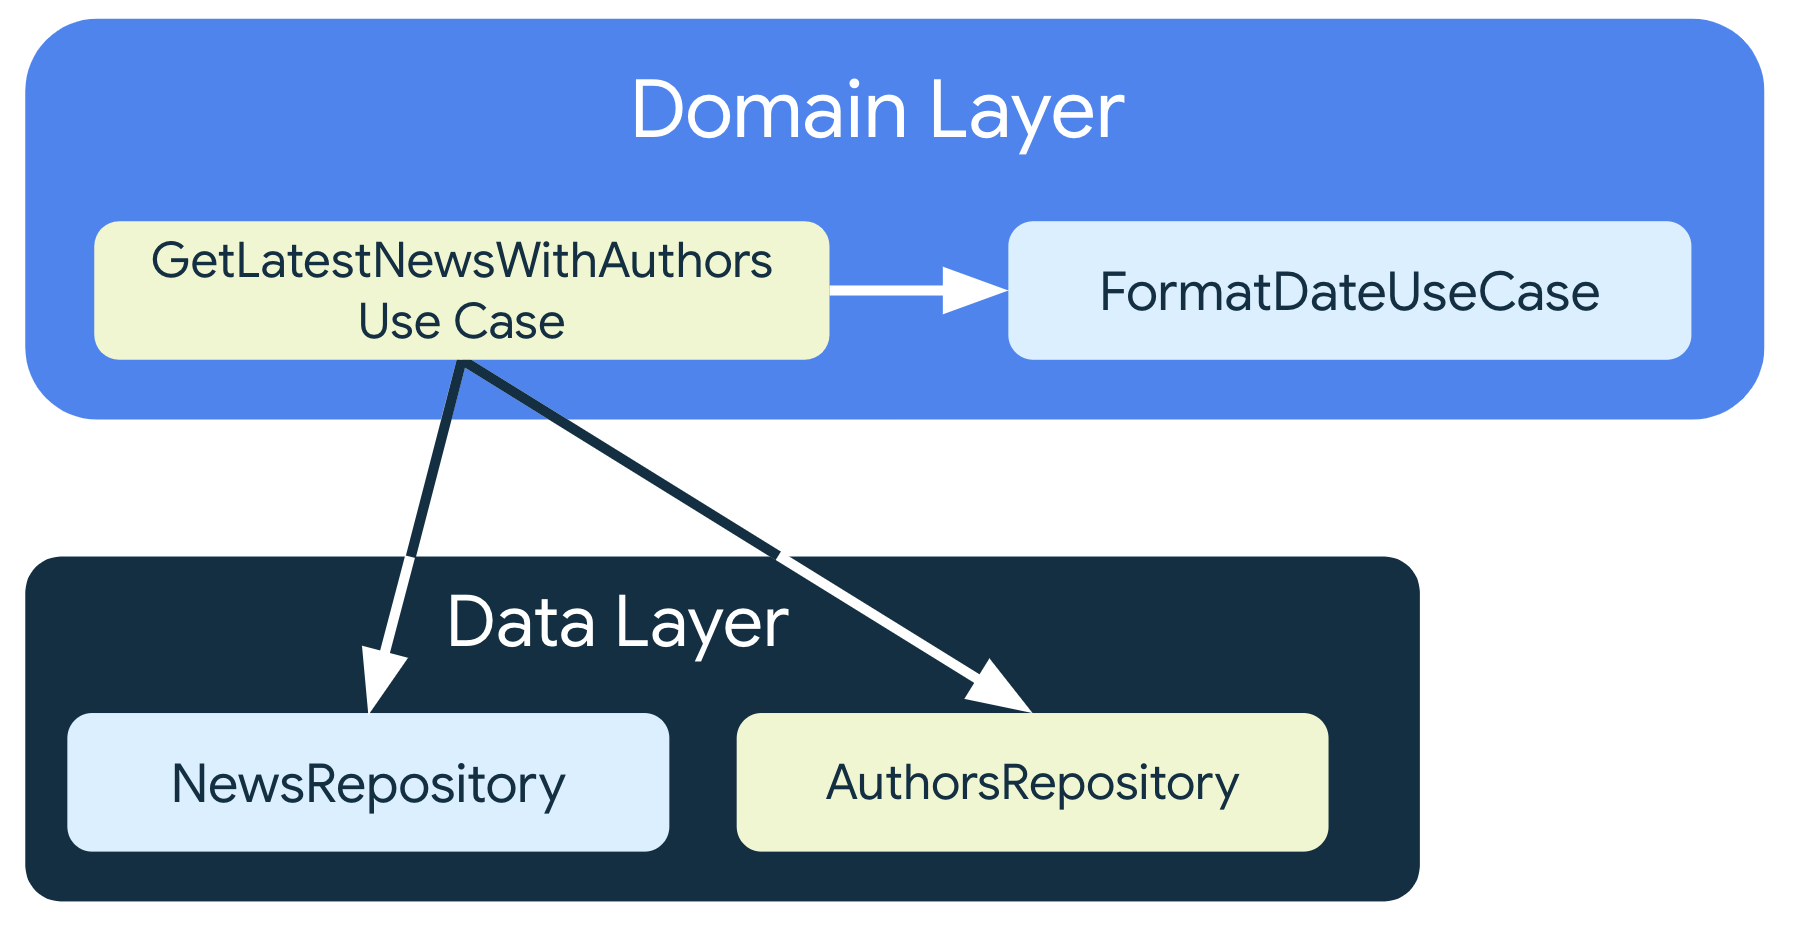 GetLatestNewsWithAuthorsUseCase depends on repository classes from the
    data layer, but it also depends on FormatDataUseCase, another use case class
    that is also in the domain layer.